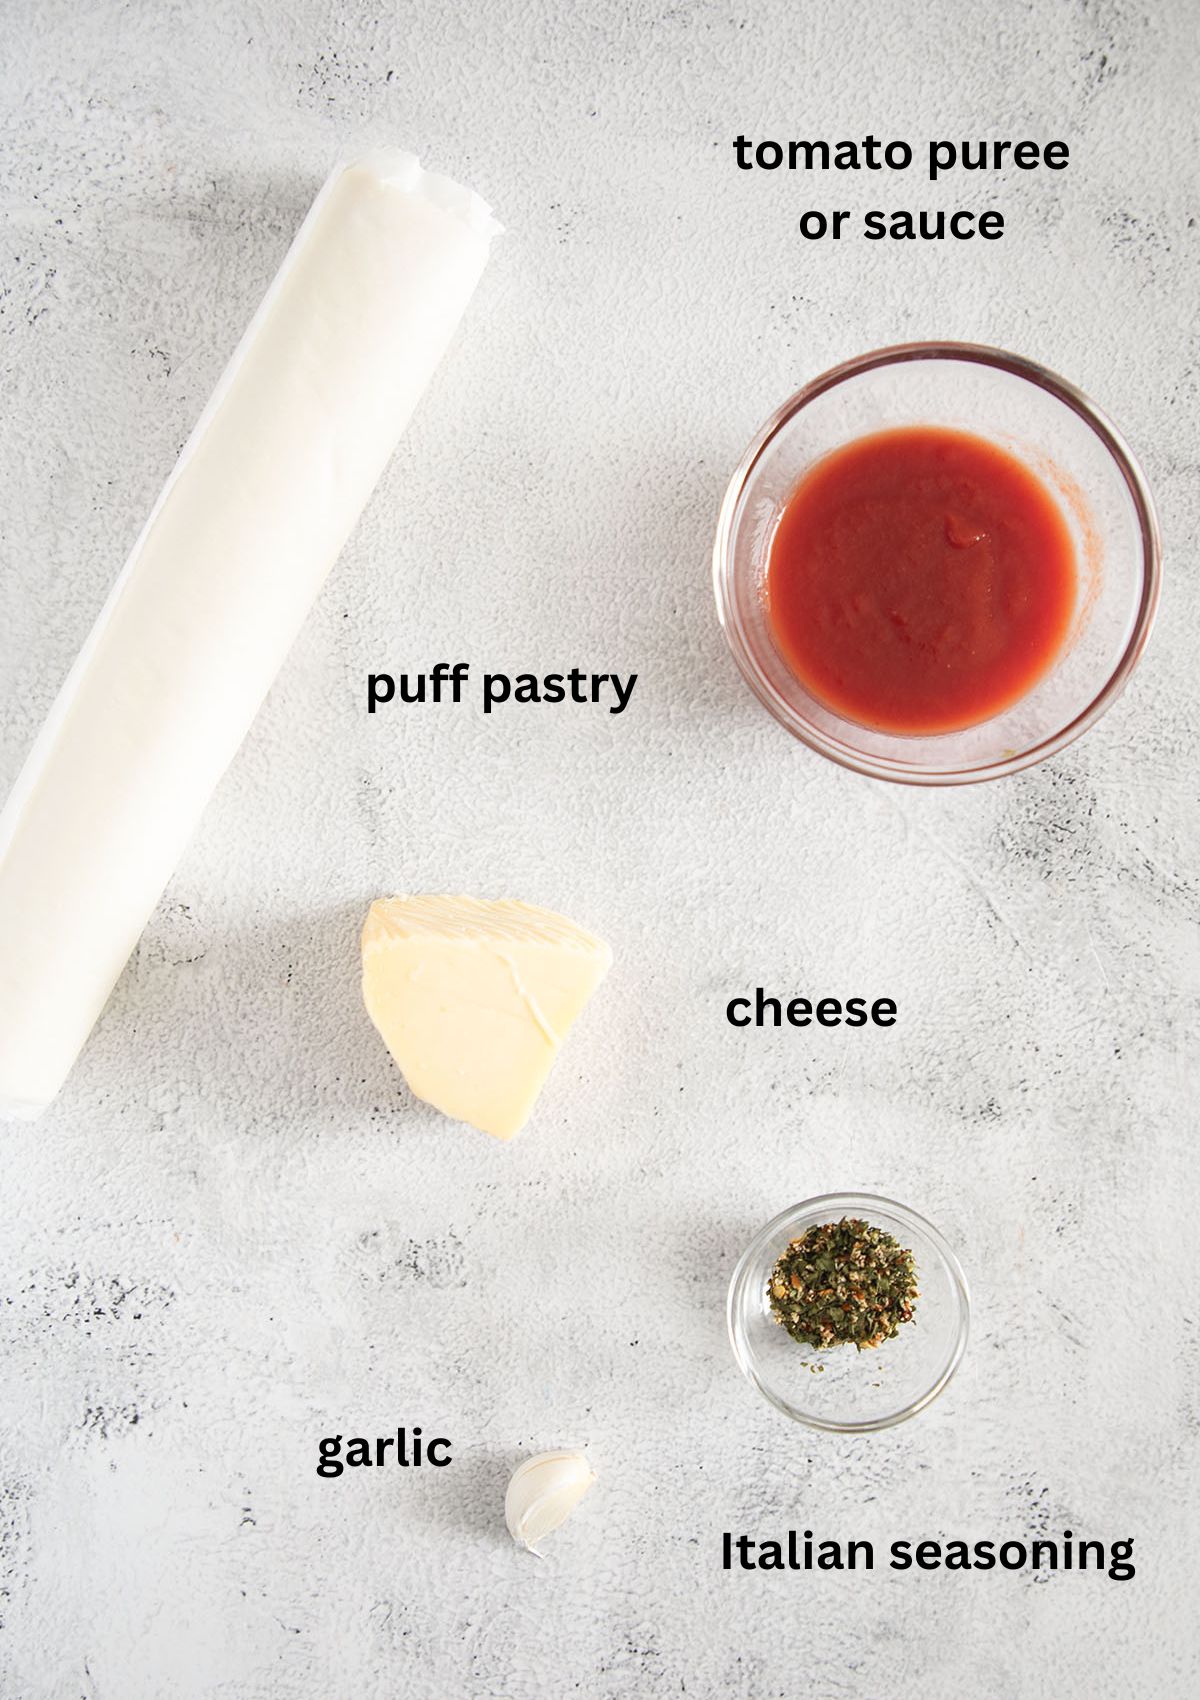 listed ingredients for pinwheels: puff pastry, tomato sauce, cheese, garlic, seasoning.